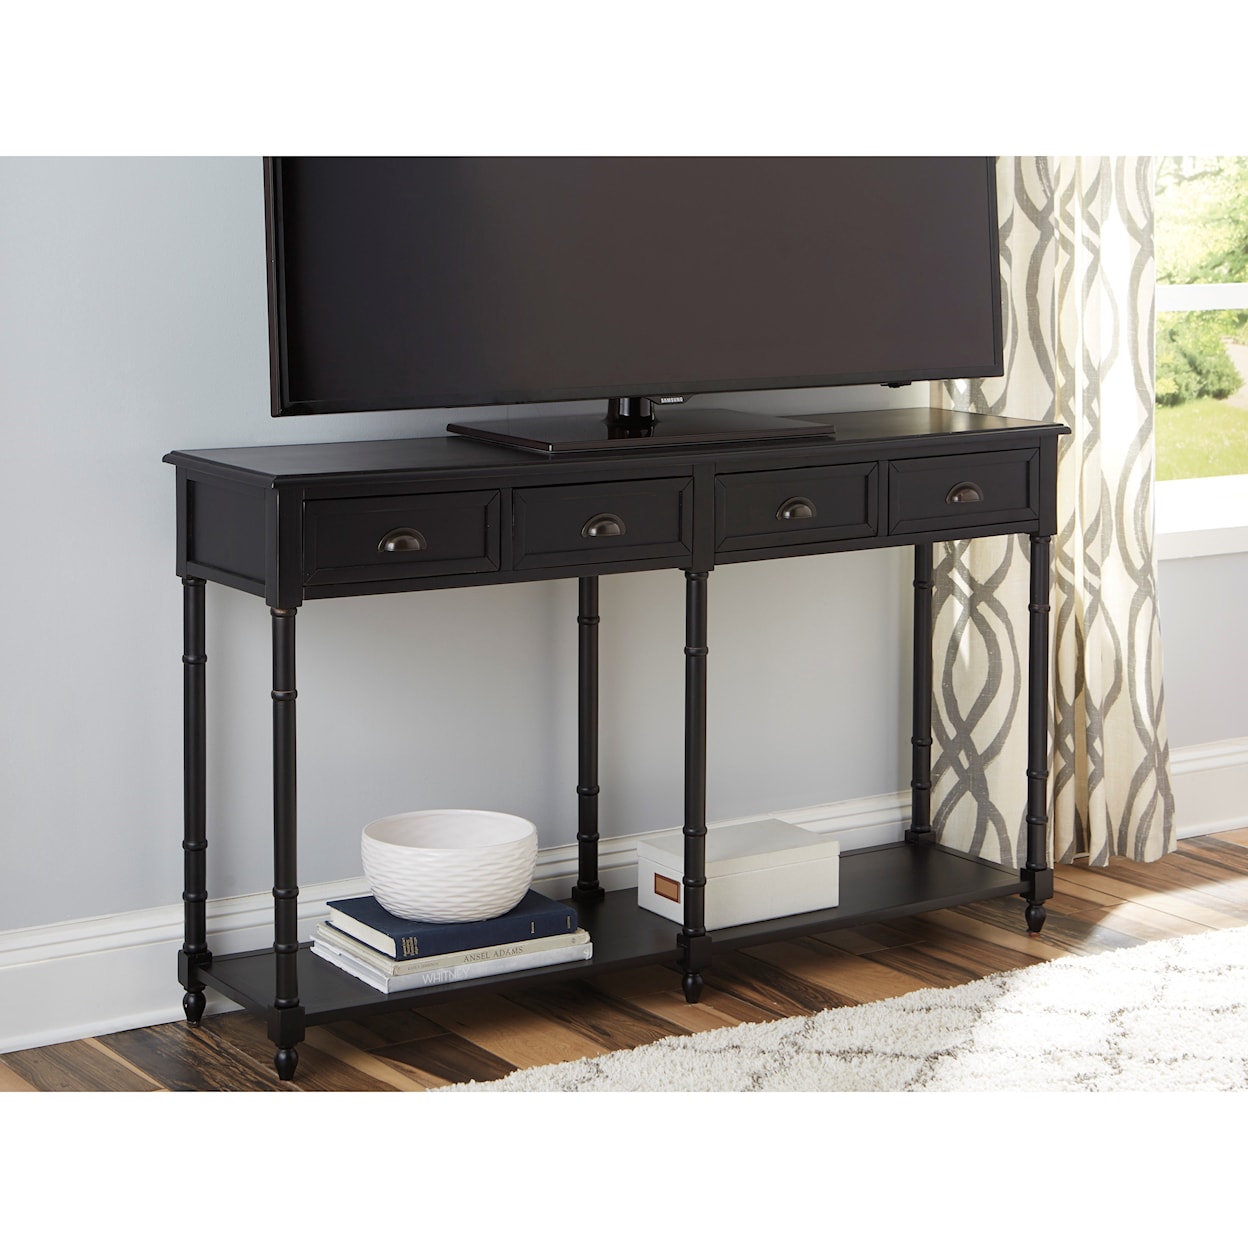 Signature Design by Ashley Eirdale Console Sofa Table